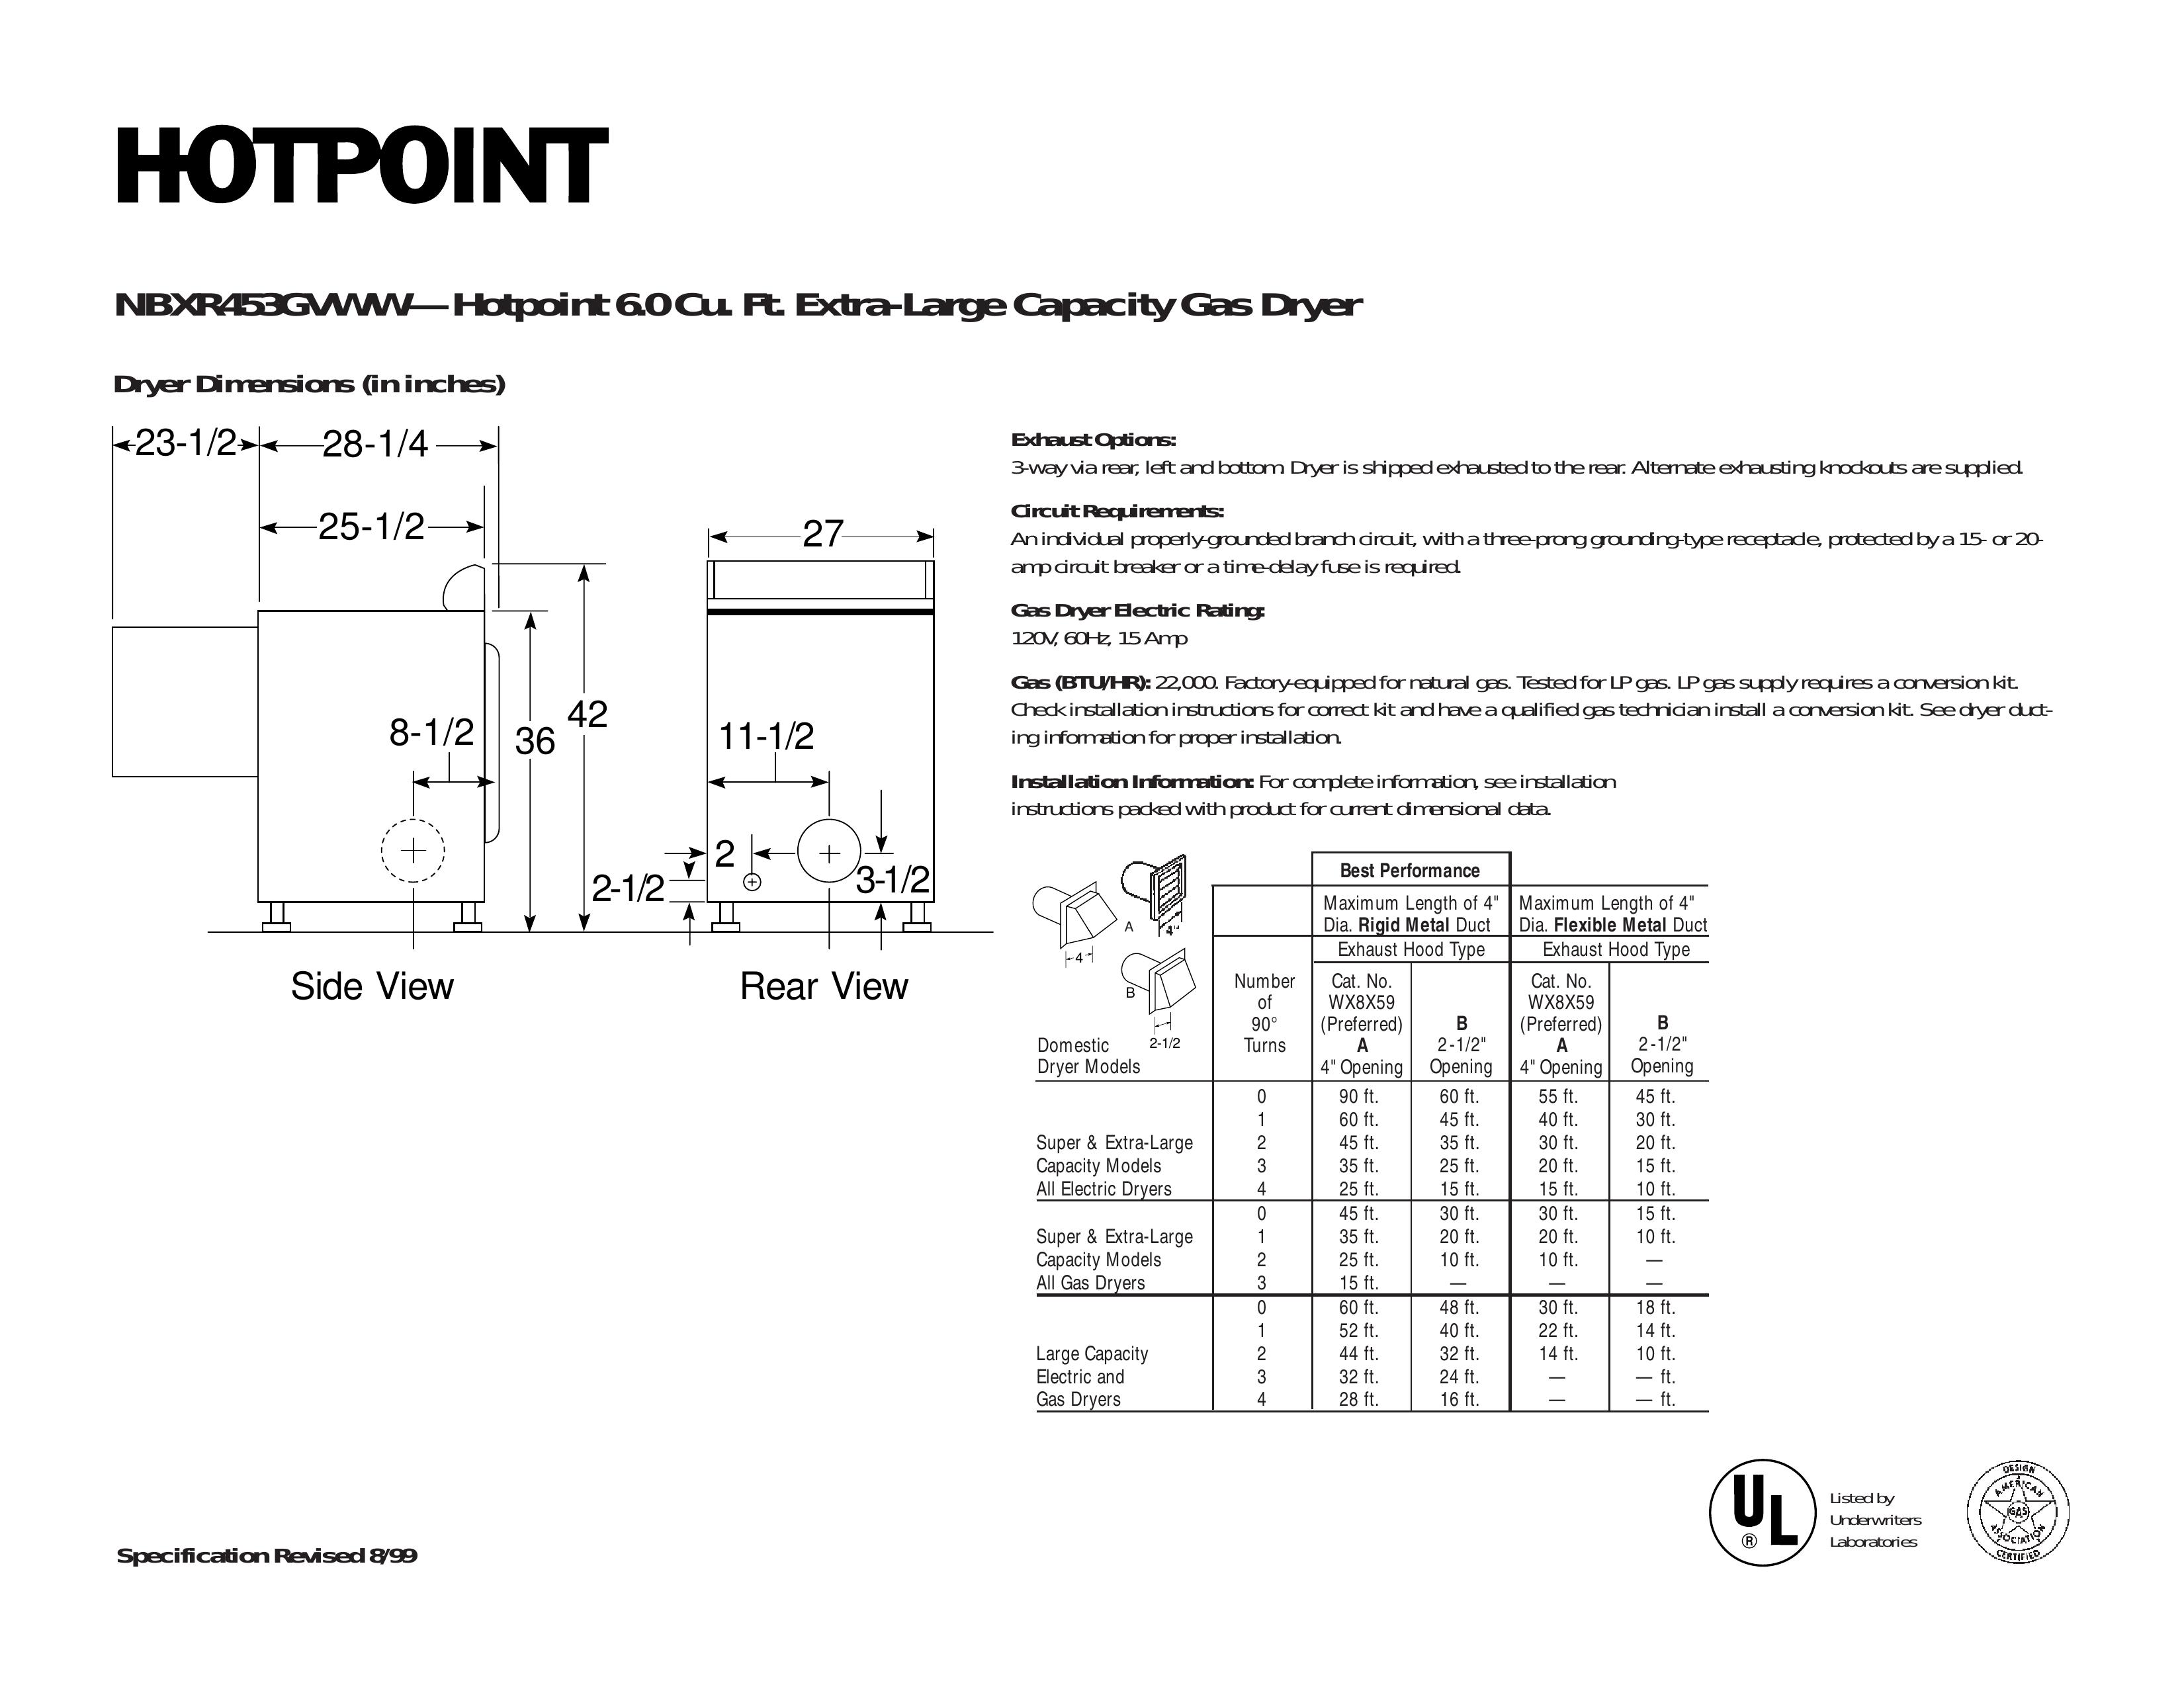 Hotpoint NBXR453EVAA Clothes Dryer User Manual